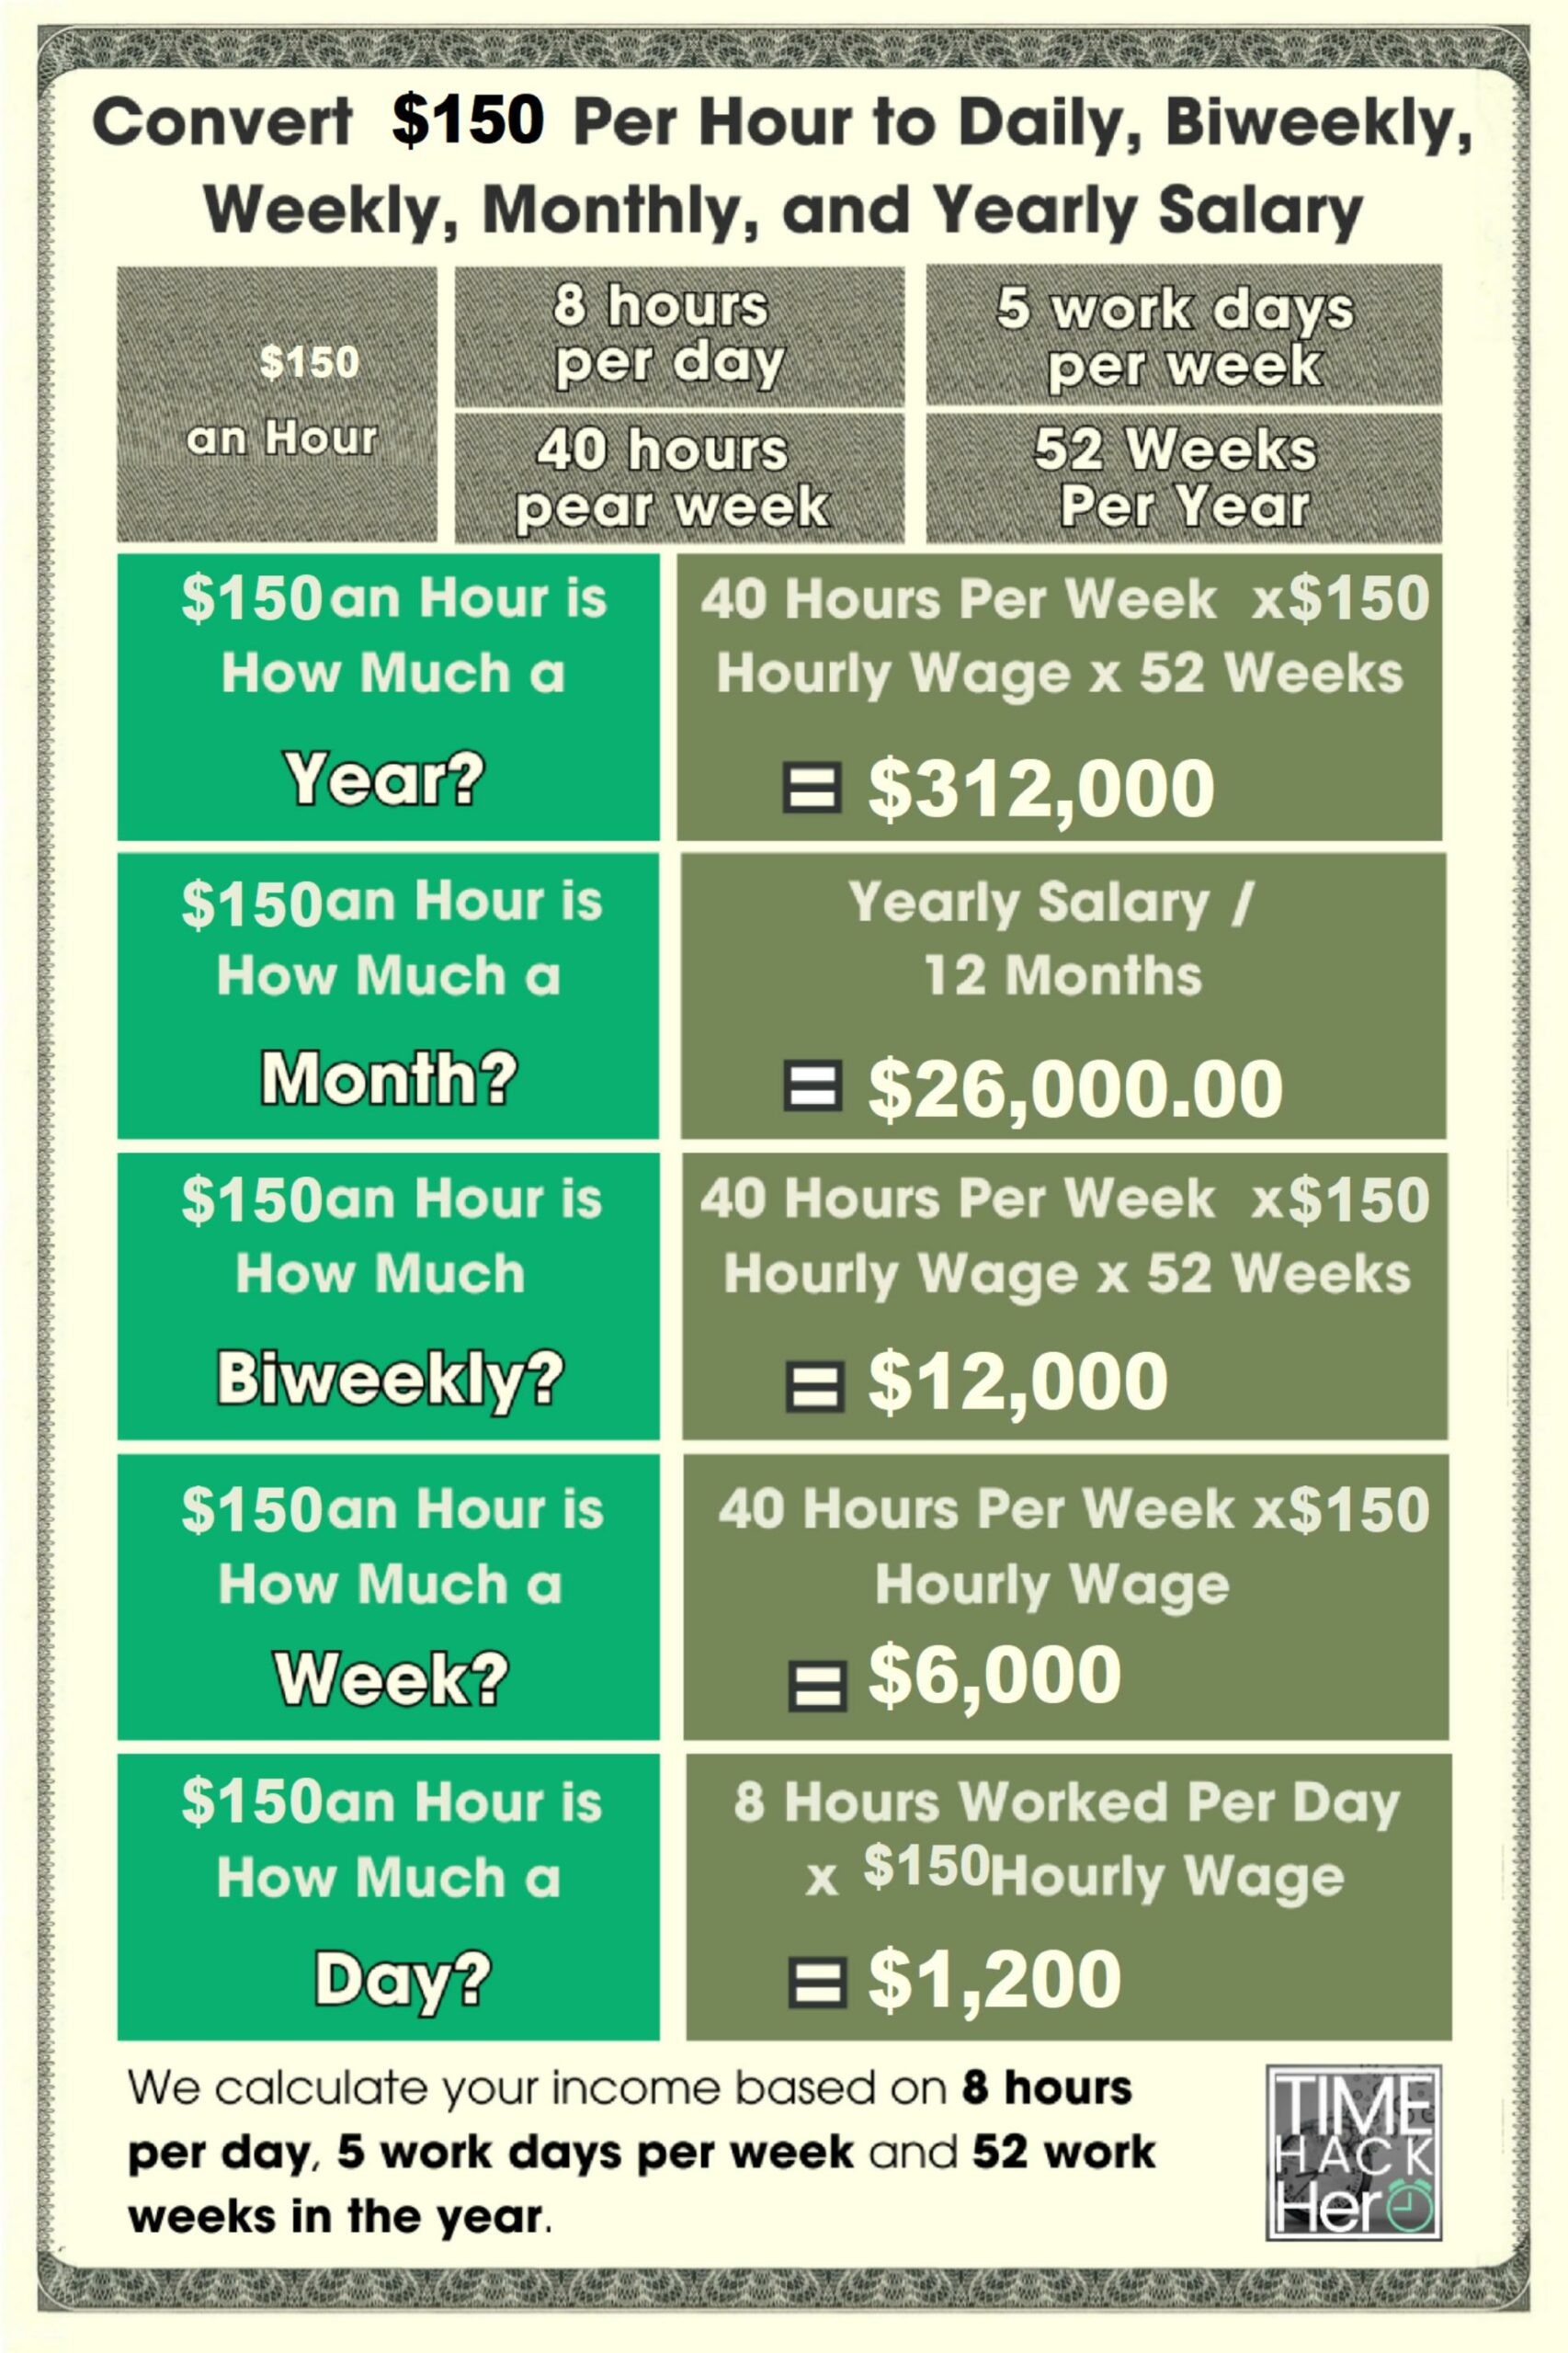 Convert $150 Per Hour to Weekly, Monthly, and Yearly Salary